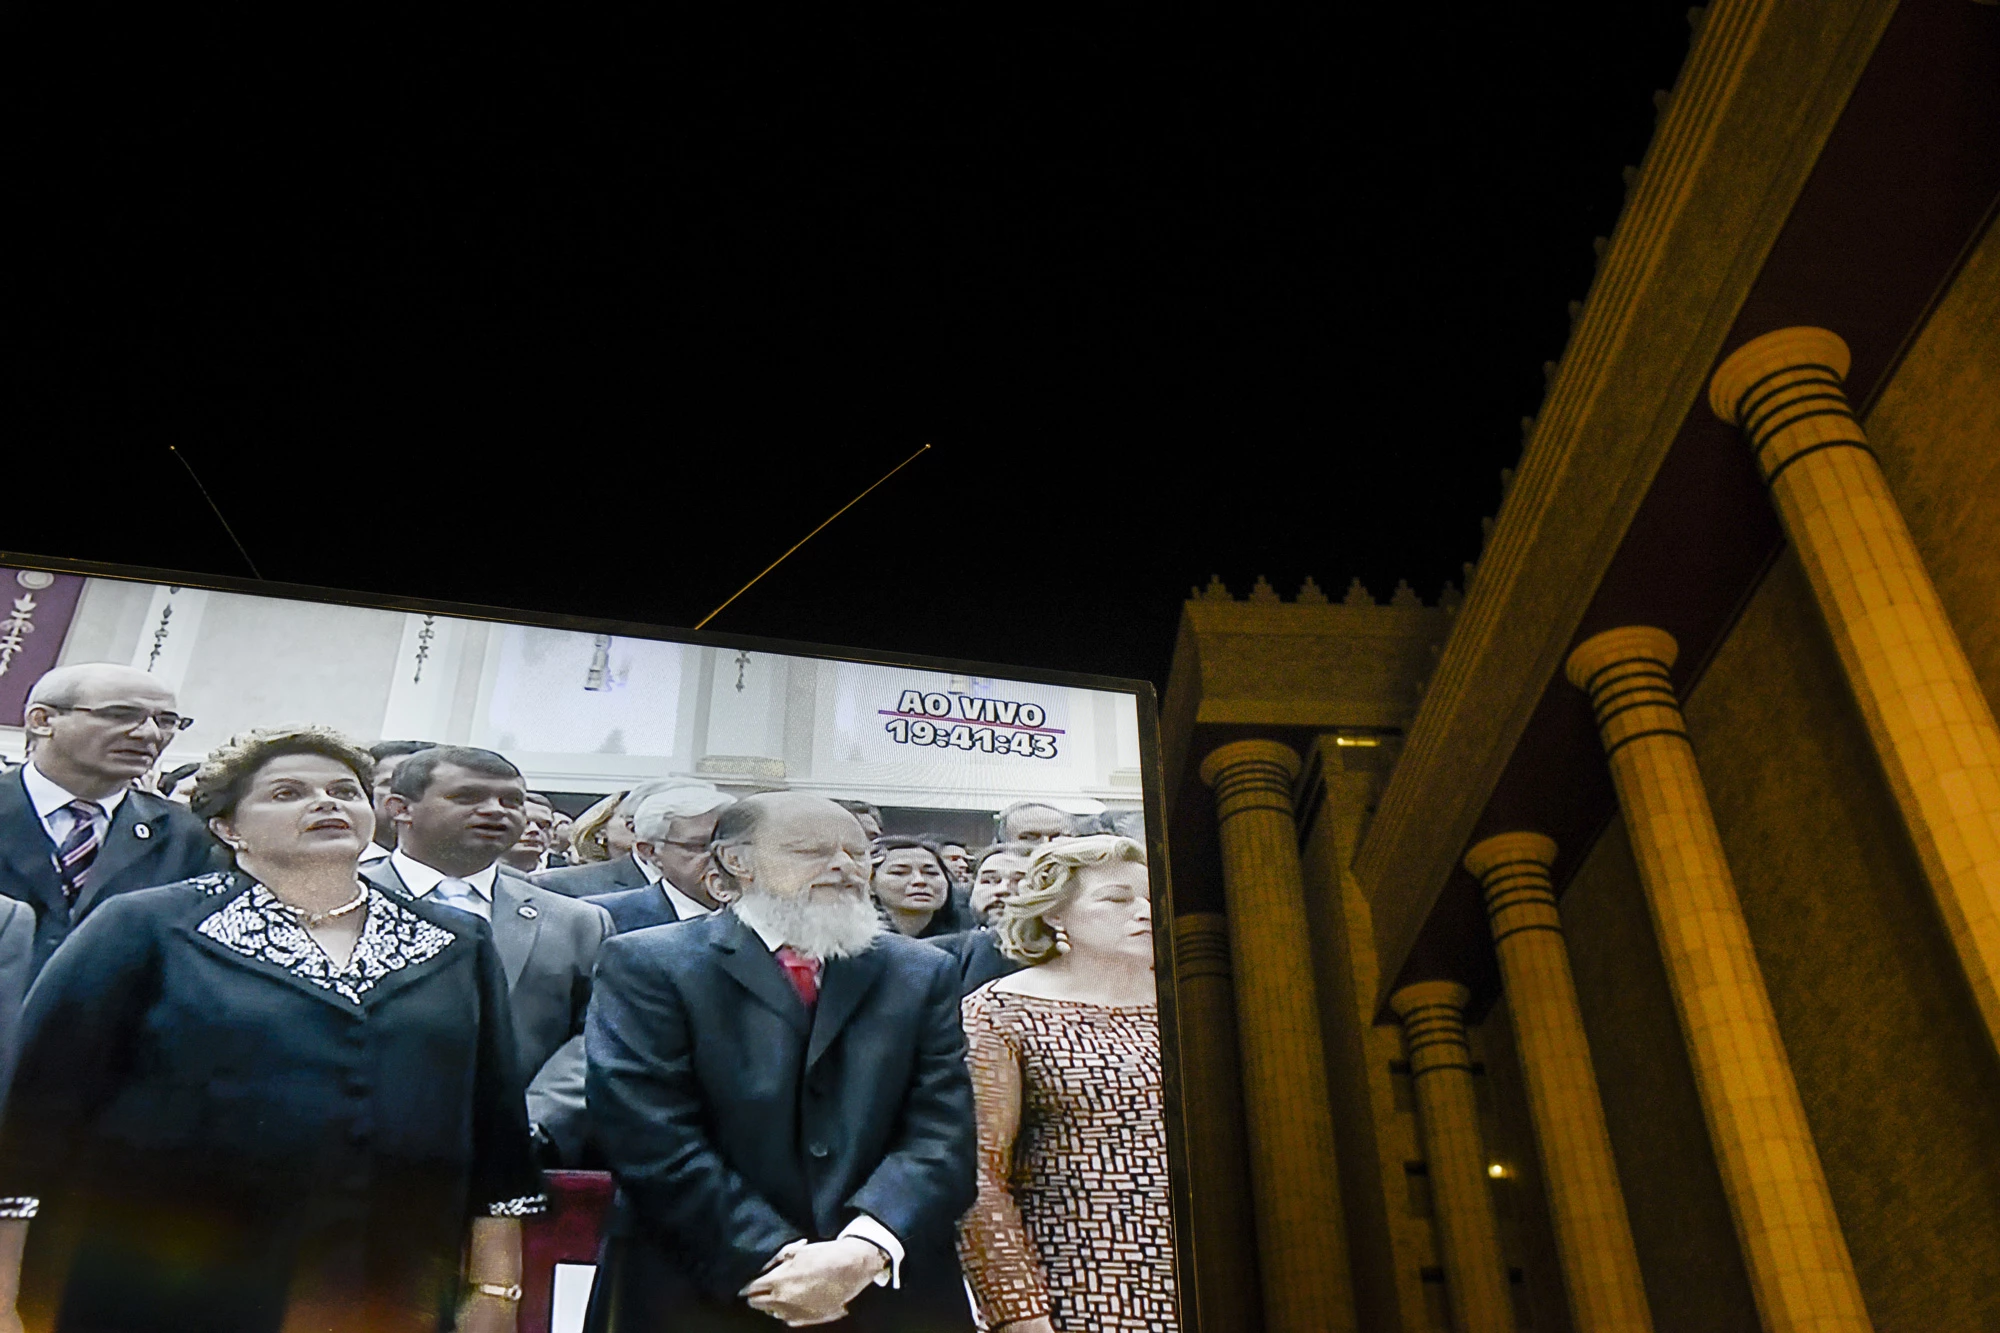 Dilma Rousseff, Brazil's president, front row left, and billionaire Edir Macedo, owner and chairman of Rede Record de Televisao Angola Lda, front row center, are projected on a screen displayed outside a replica of Solomon's Temple during its inauguration ceremony in Sao Paulo, Brazil, on Thursday, July 31, 2014. Billionaire Edir Macedo's temple spans two city blocks and cost 680 million reais ($300 million) to erect. Macedo's net worth has grown to $1.5 billion since he bought the Record TV network in 1989 with a $45 million interest-free loan from the Universal Church of the Kingdom of God, which he founded, according to the Bloomberg Billionaires Index. Photographer: Paulo Fridman/Bloomberg via Getty Images